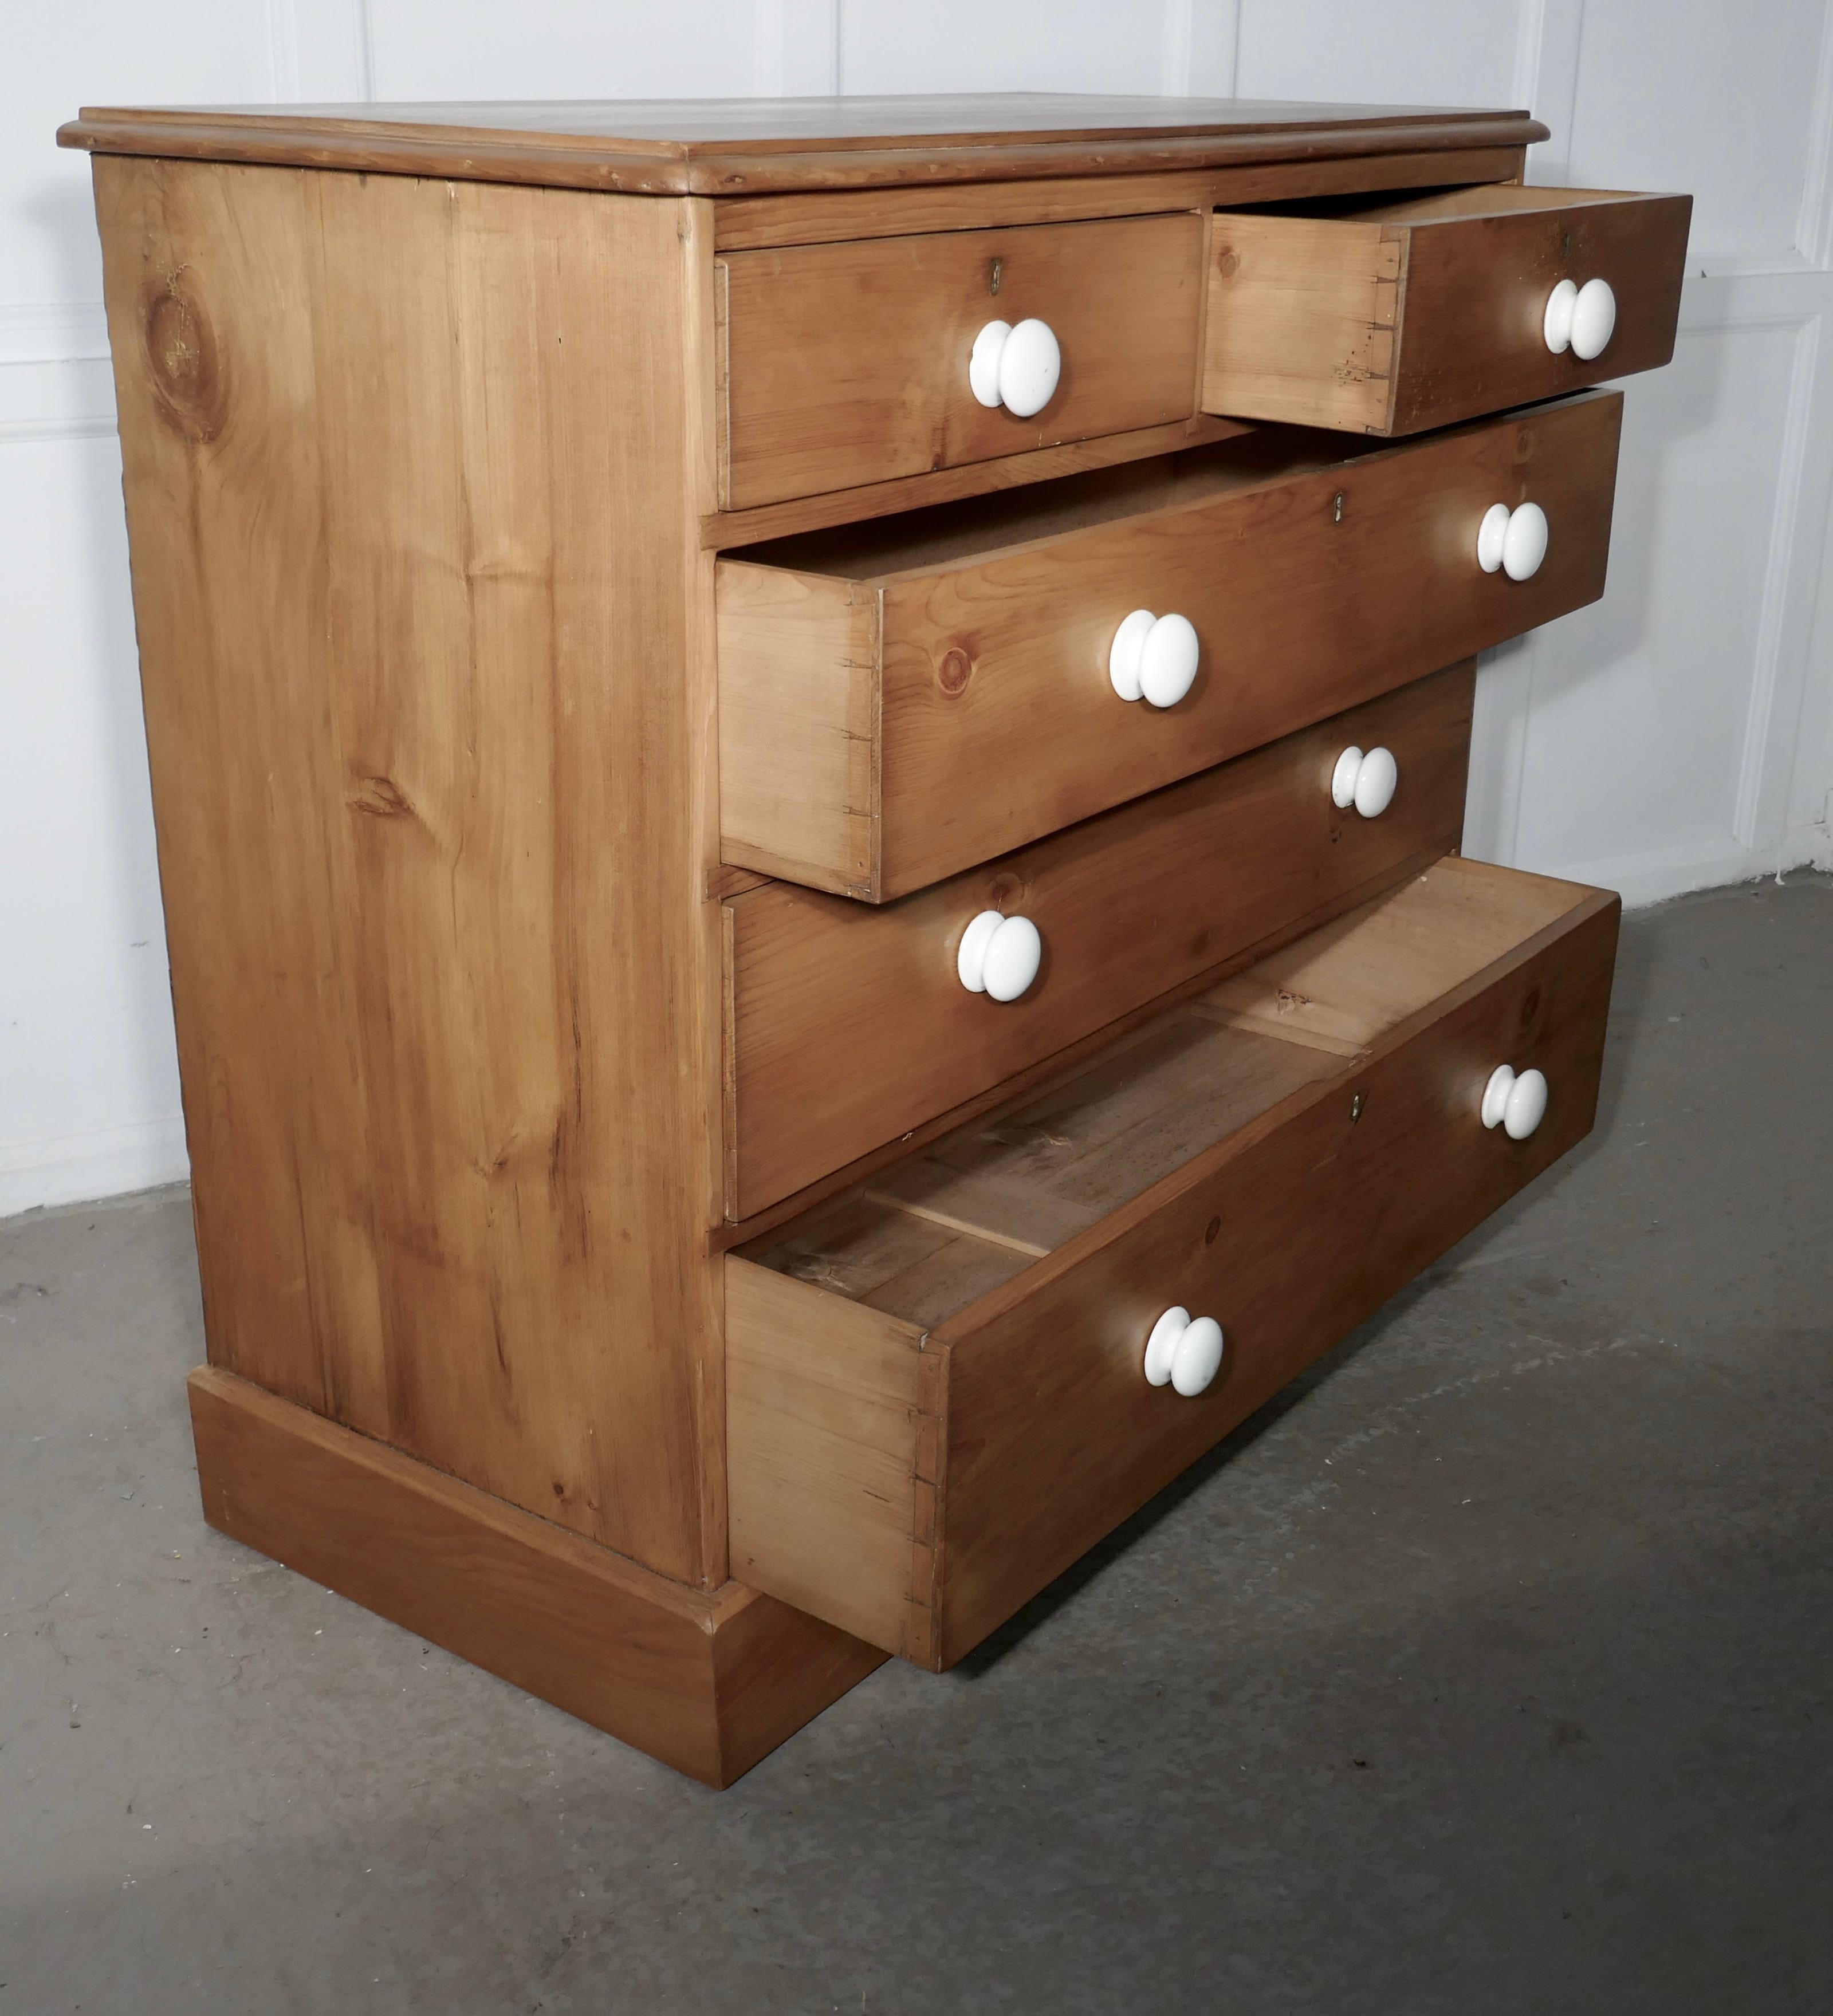 victorian pine chest of drawers